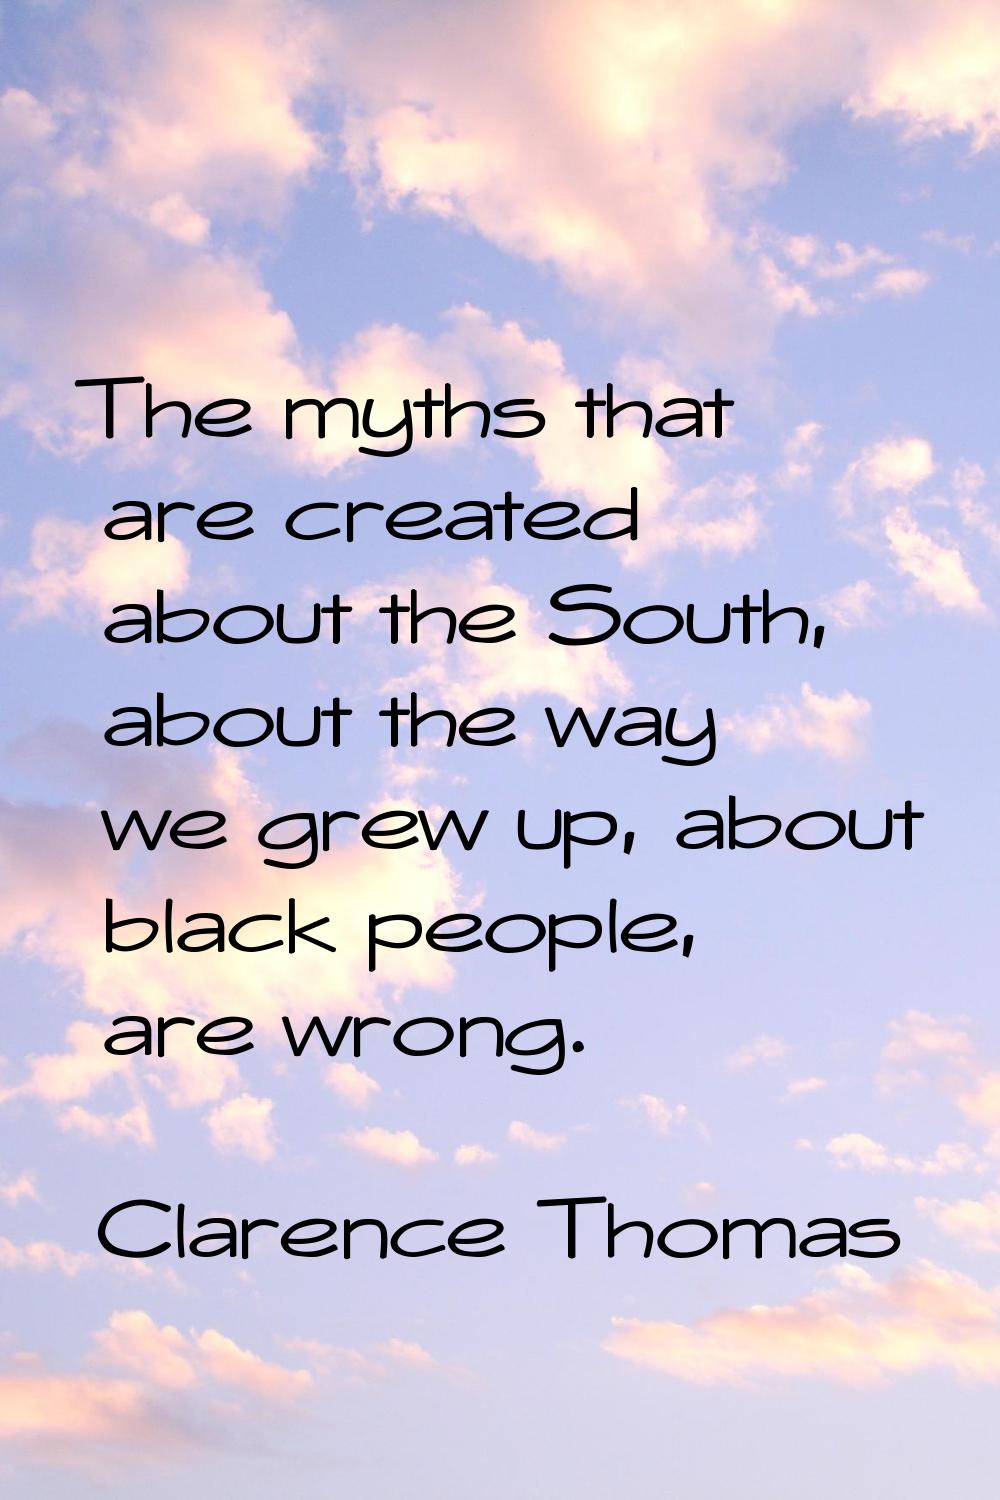 The myths that are created about the South, about the way we grew up, about black people, are wrong